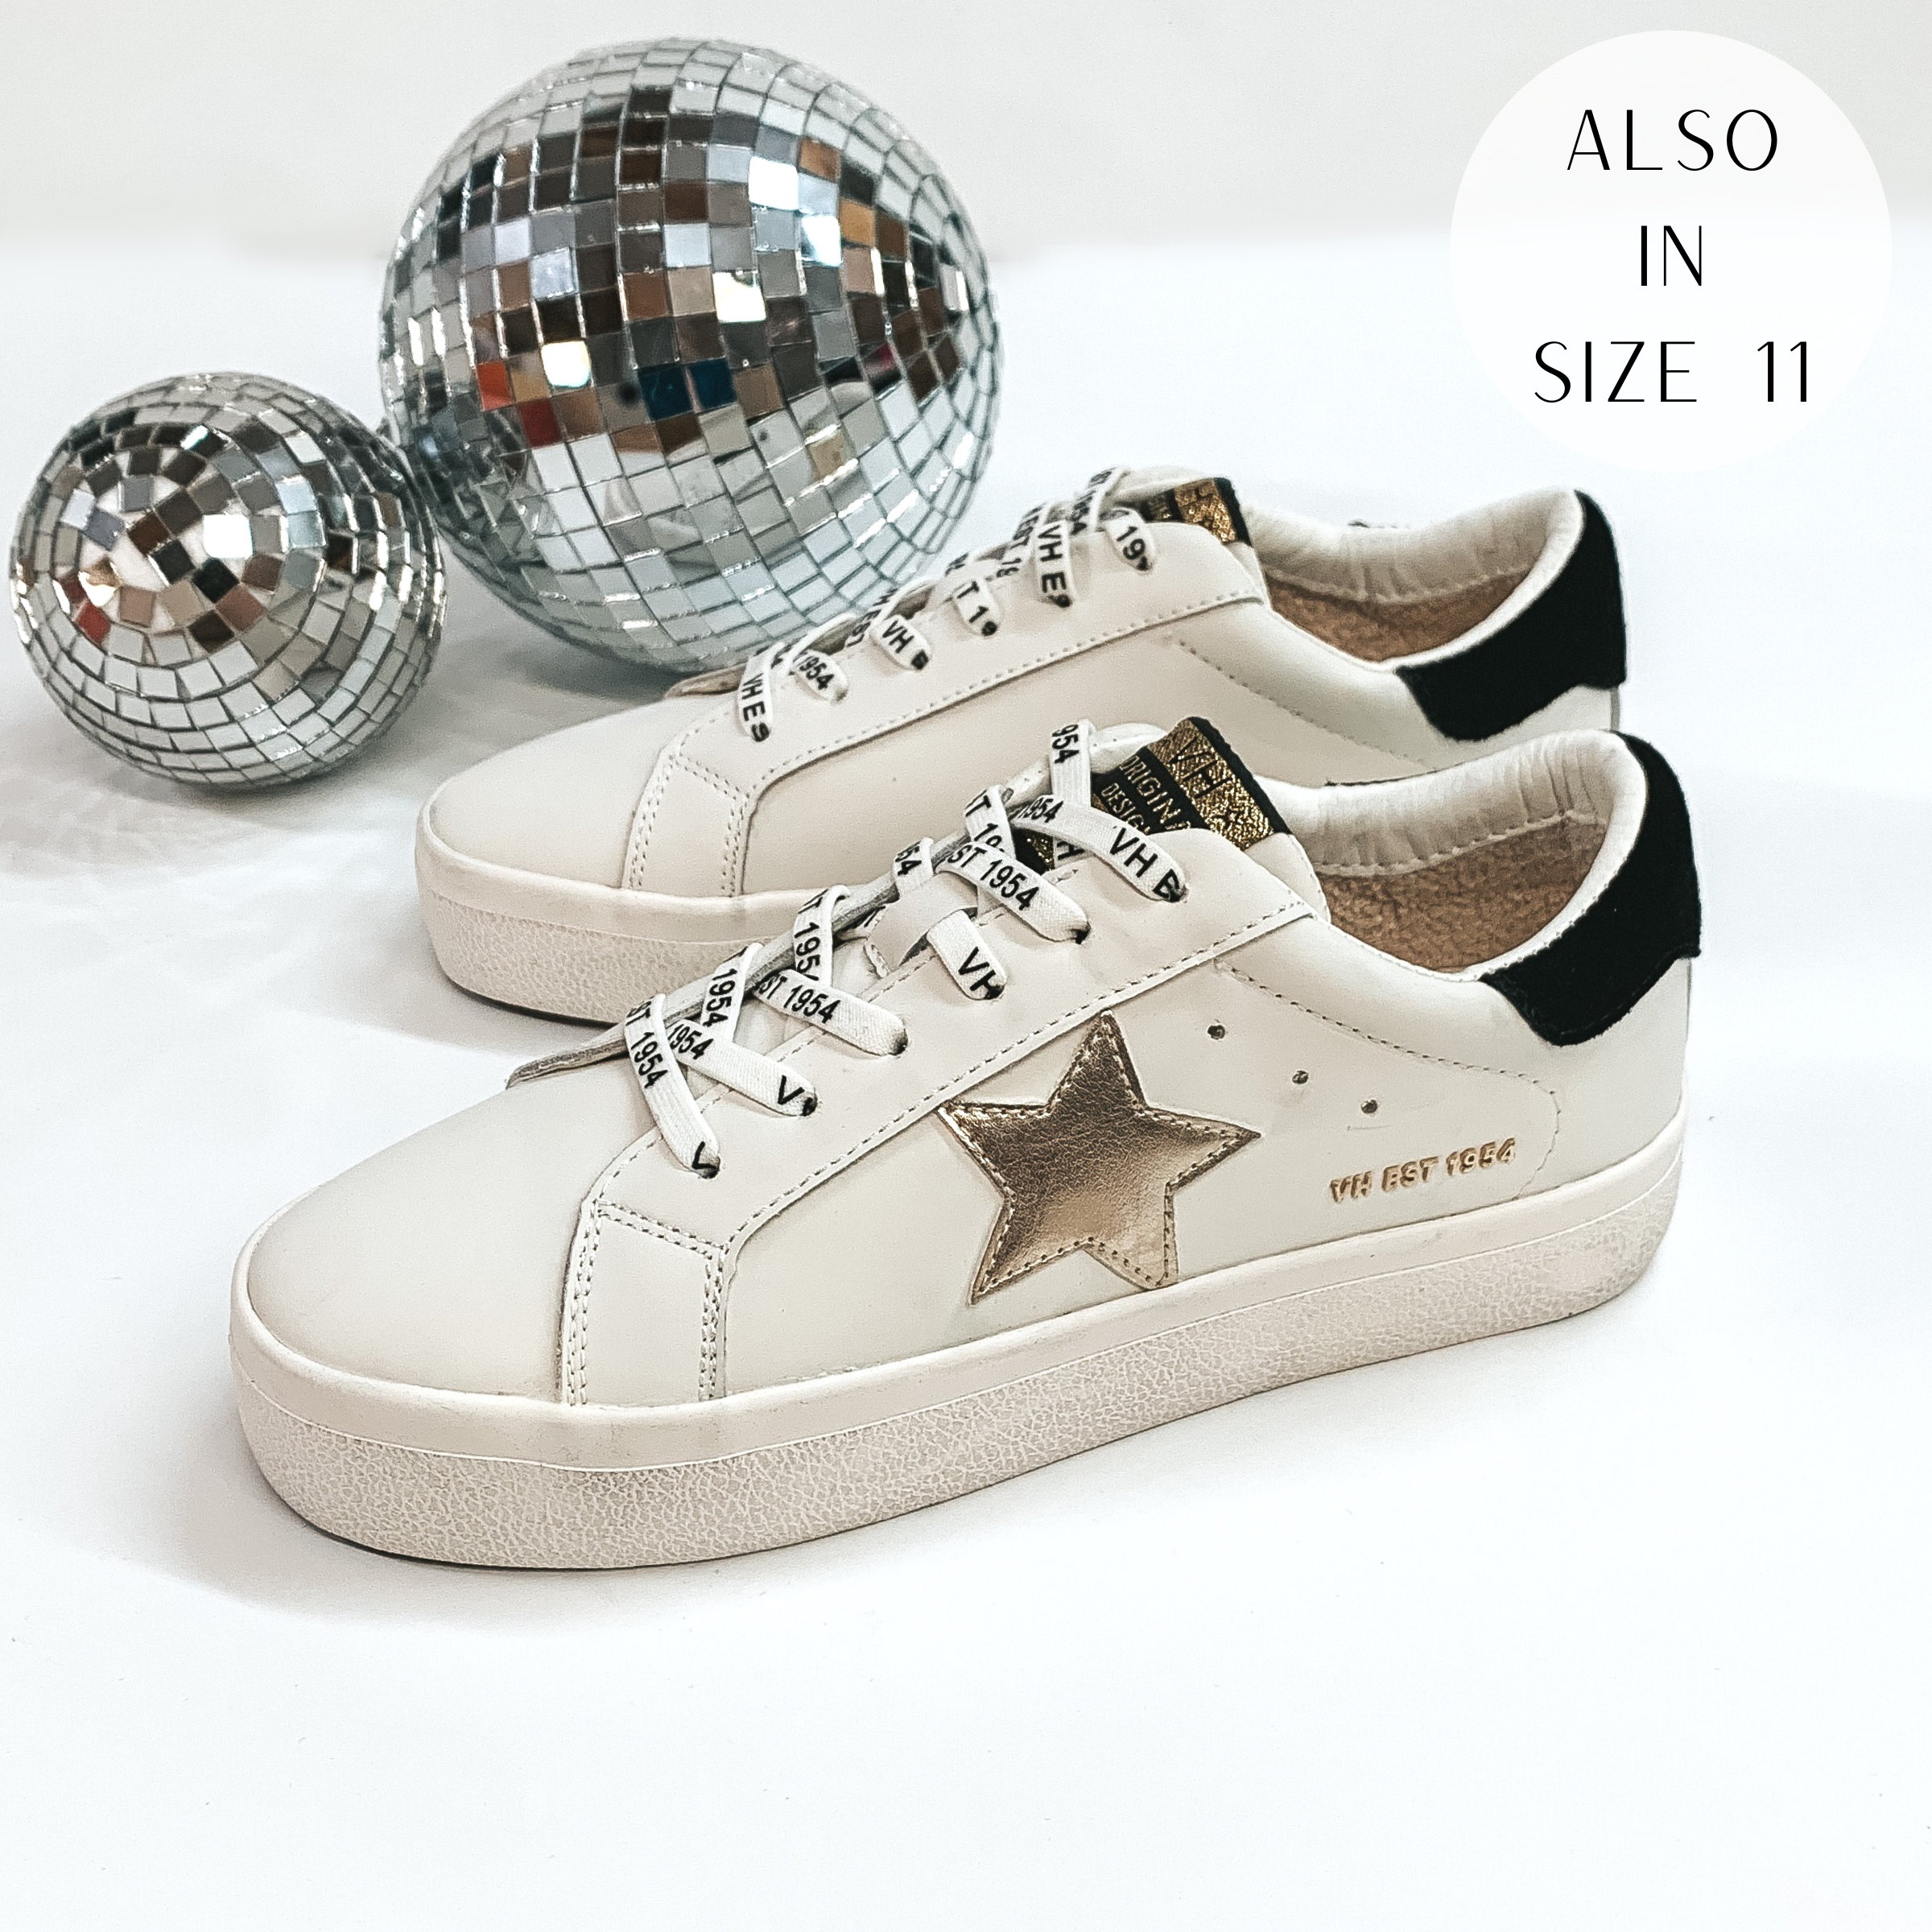 Pictured are a white pair of sneakers with a gold star emblem and a black part on the heel. These shoes are pictured on a white background with disco balls in the background.